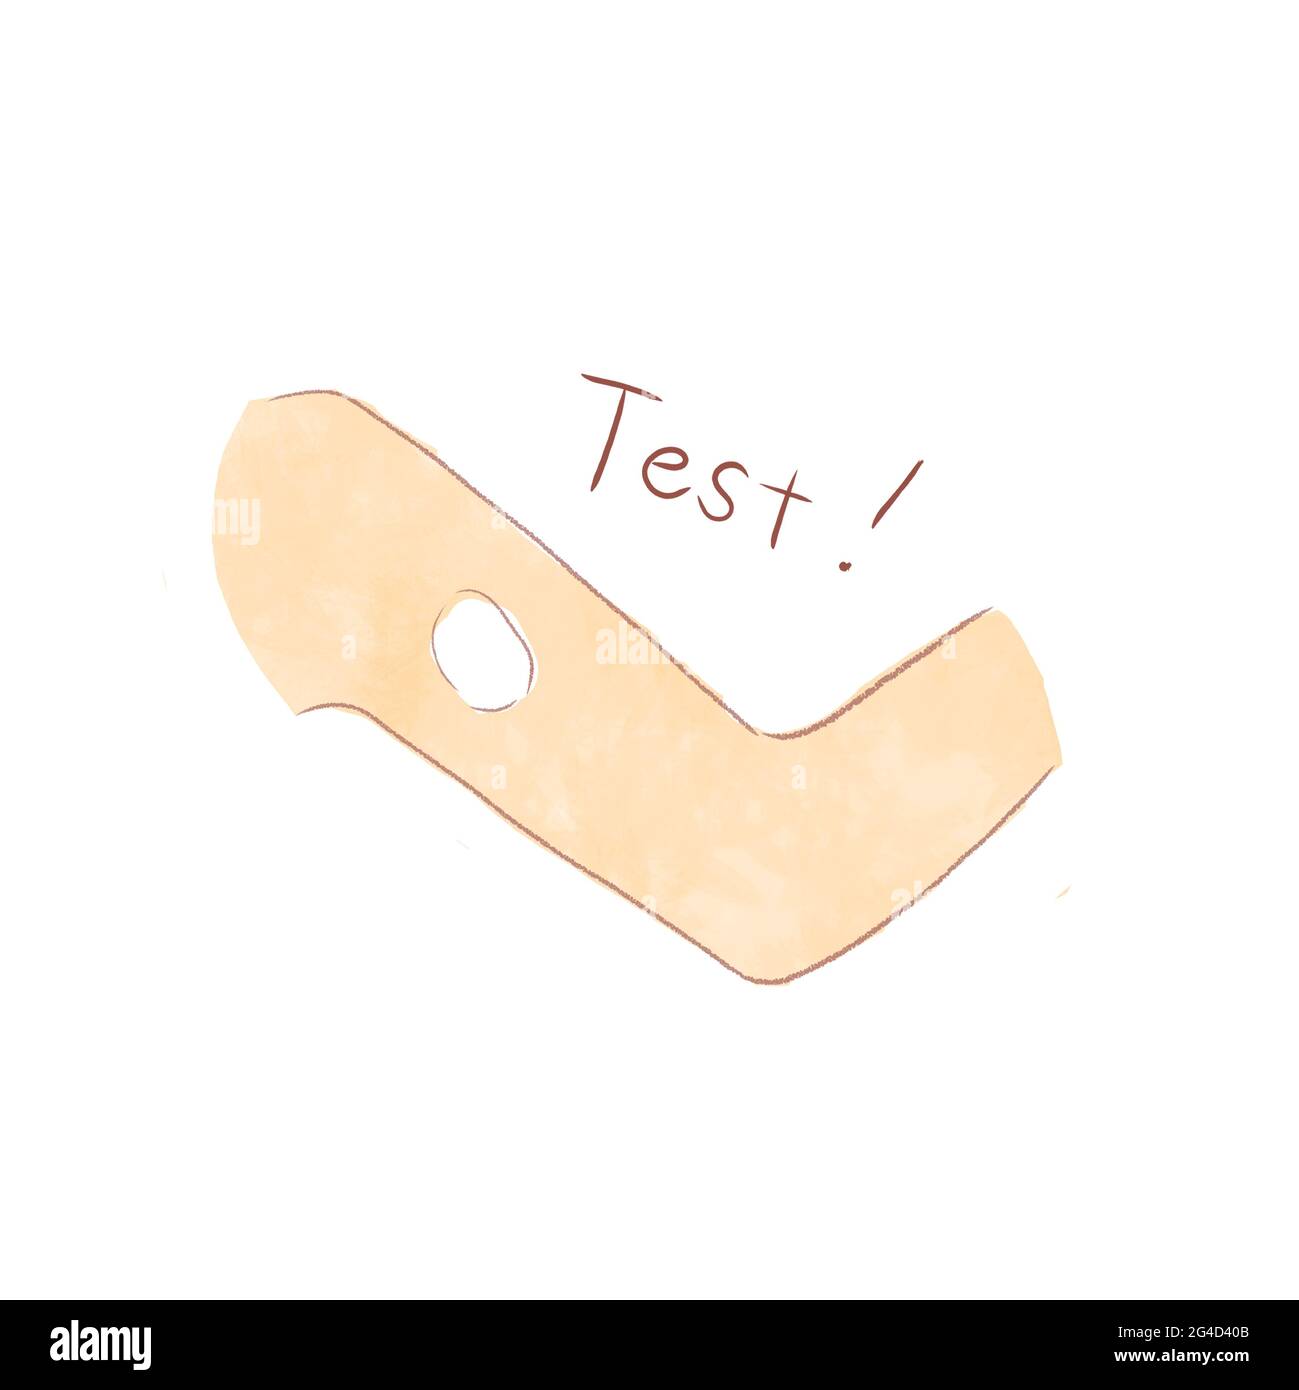 The image of patch testing on the upper arm. Cute and simple art style. On a white background. Stock Photo